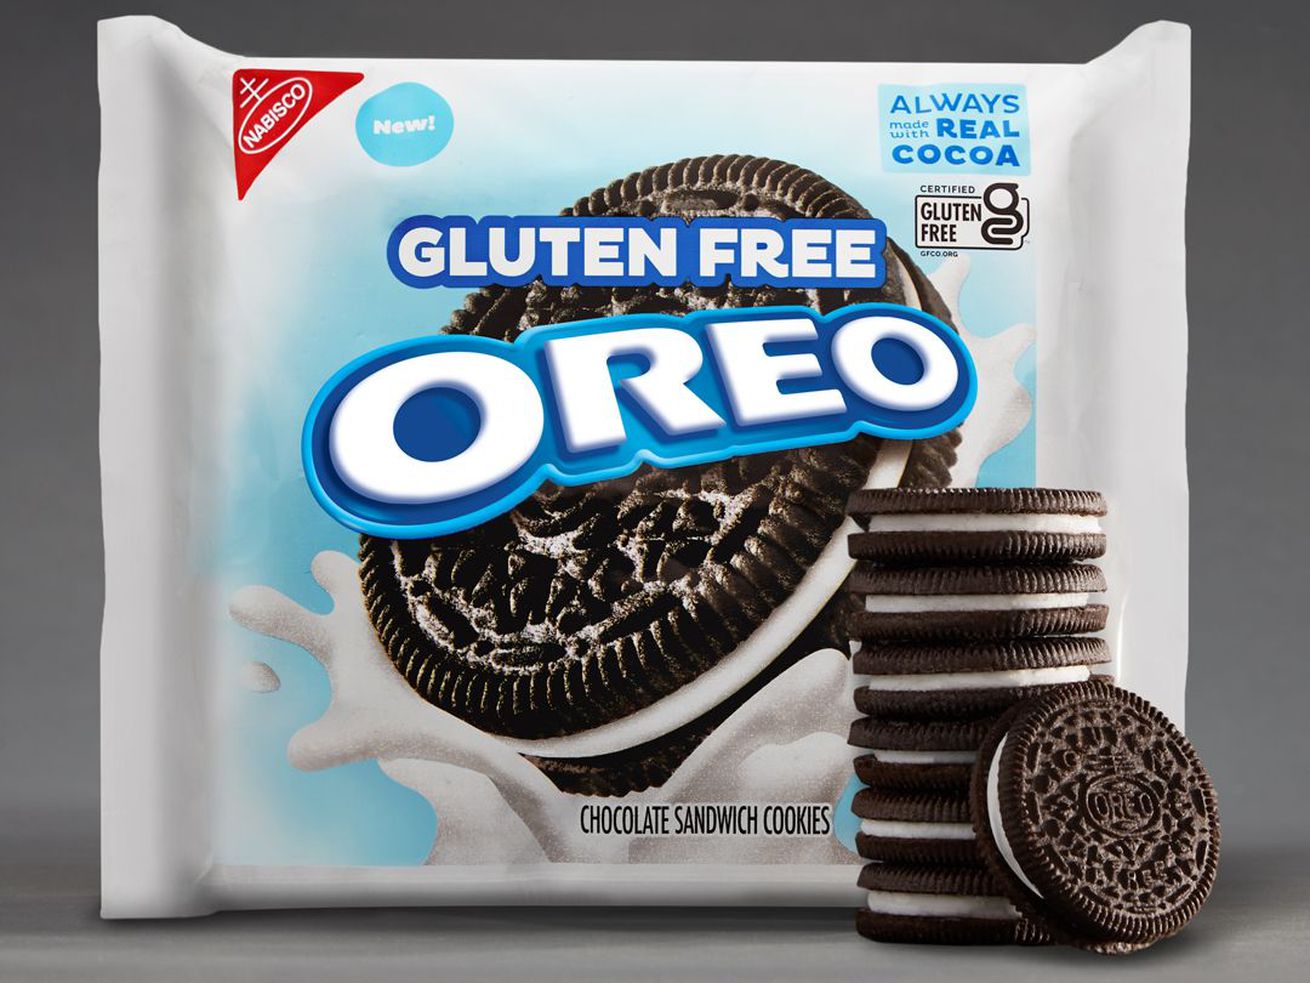 A white package of gluten-free Oreos against a gray background, with a stack of Oreo cookies in front of it.